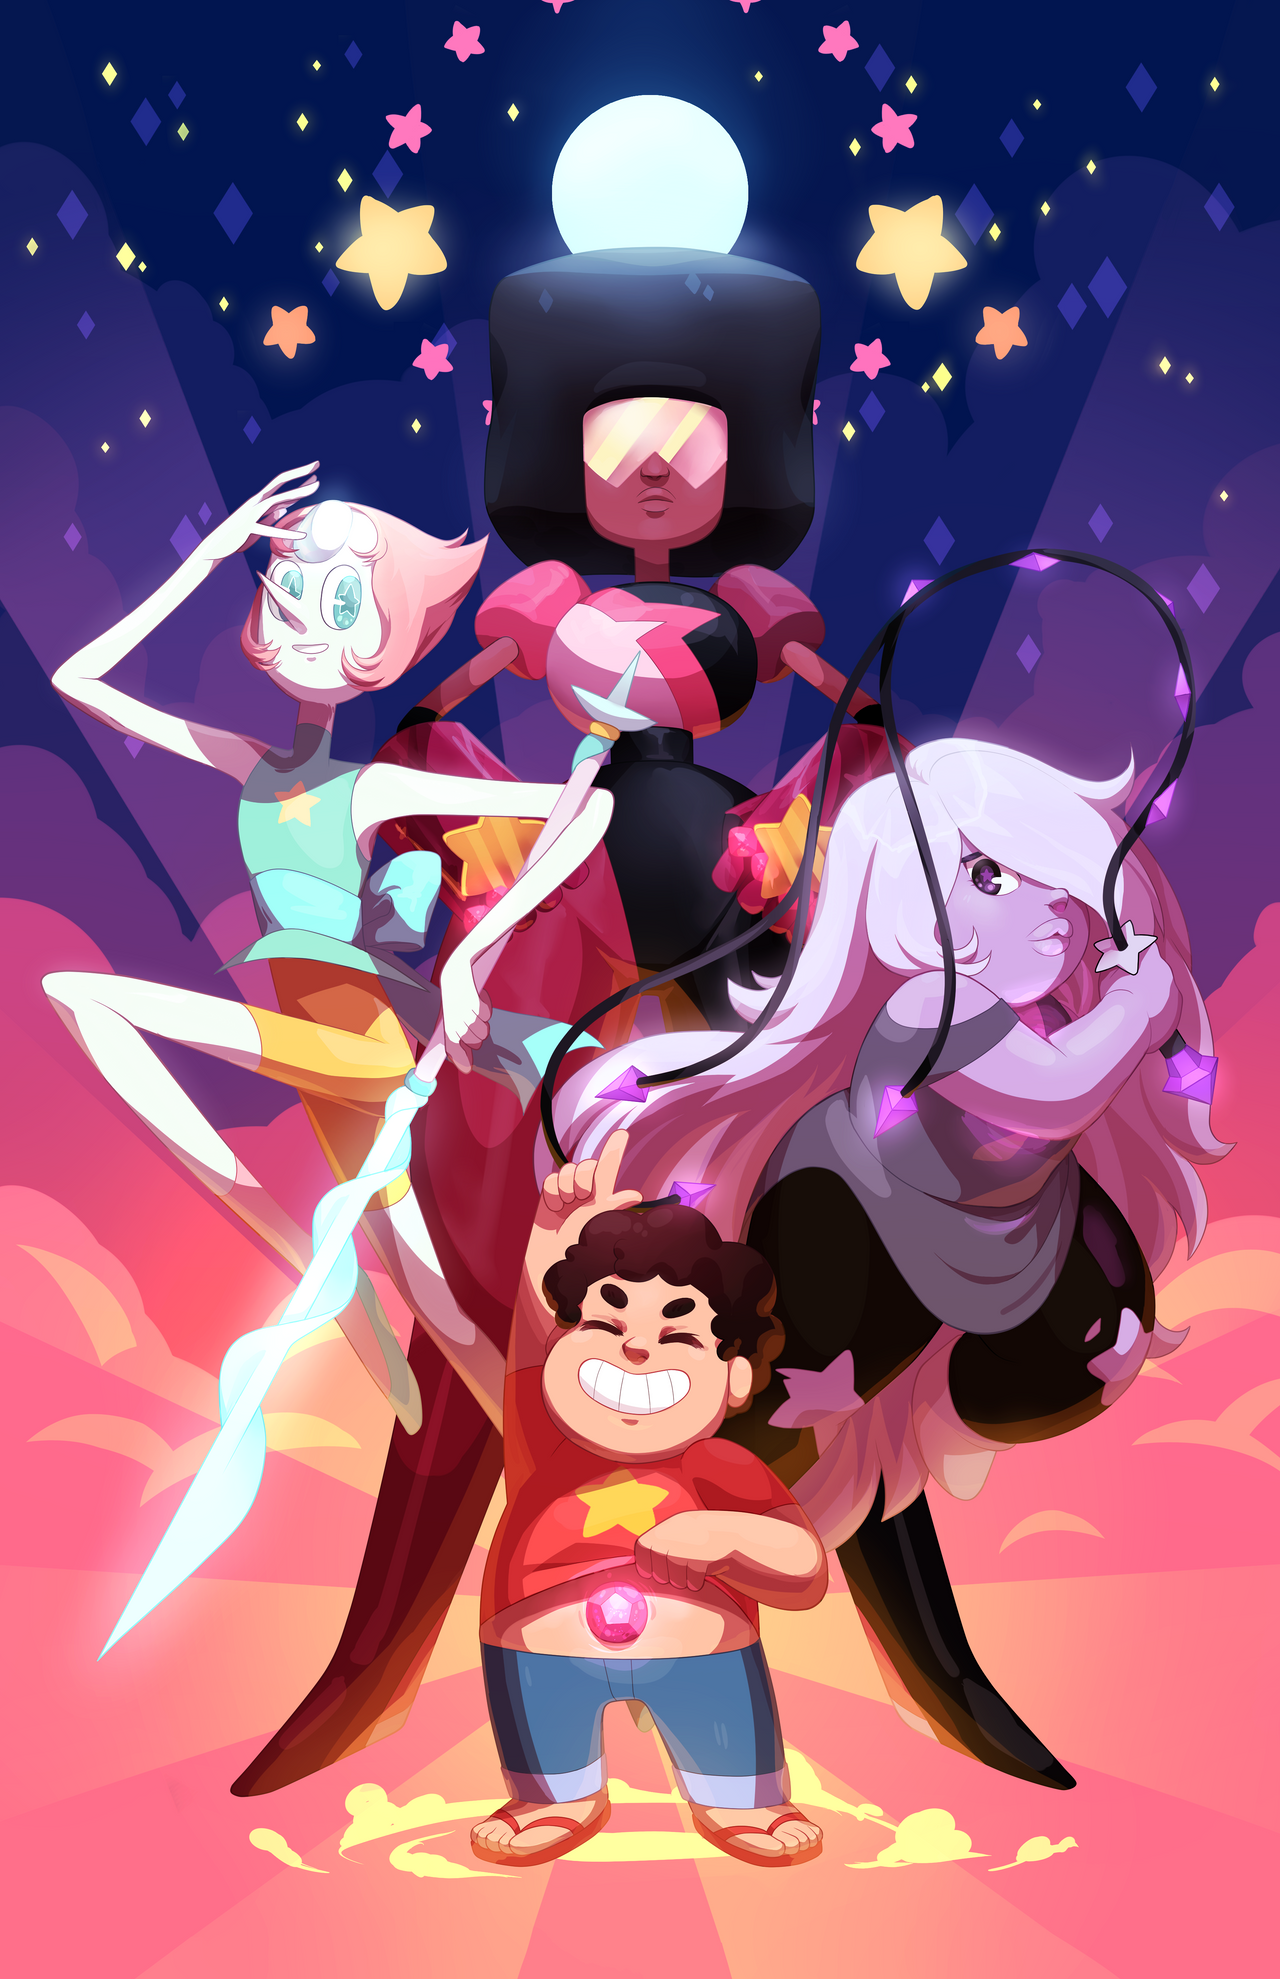 We Are The Crystal Gems by uixela on DeviantArt